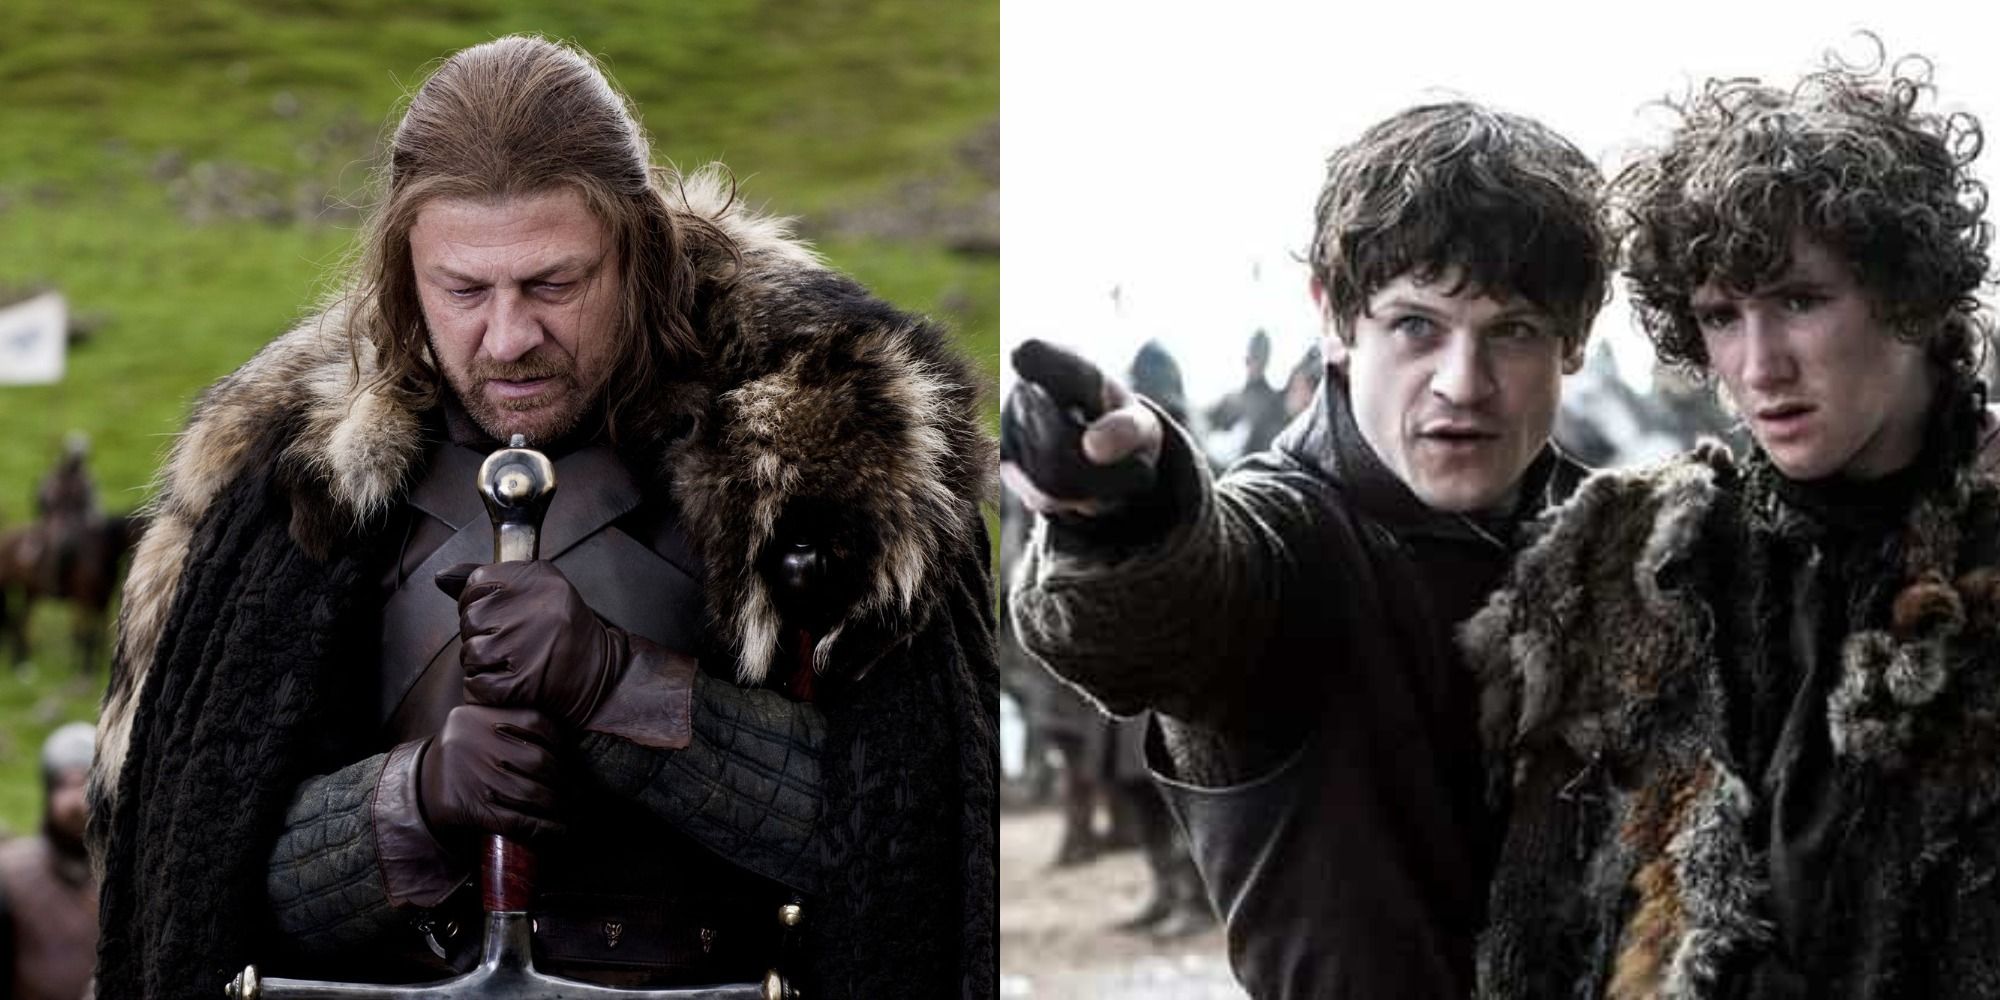 Ned Stark holds his sword Ice while Ramsay Bolton points to Rickon where he should run